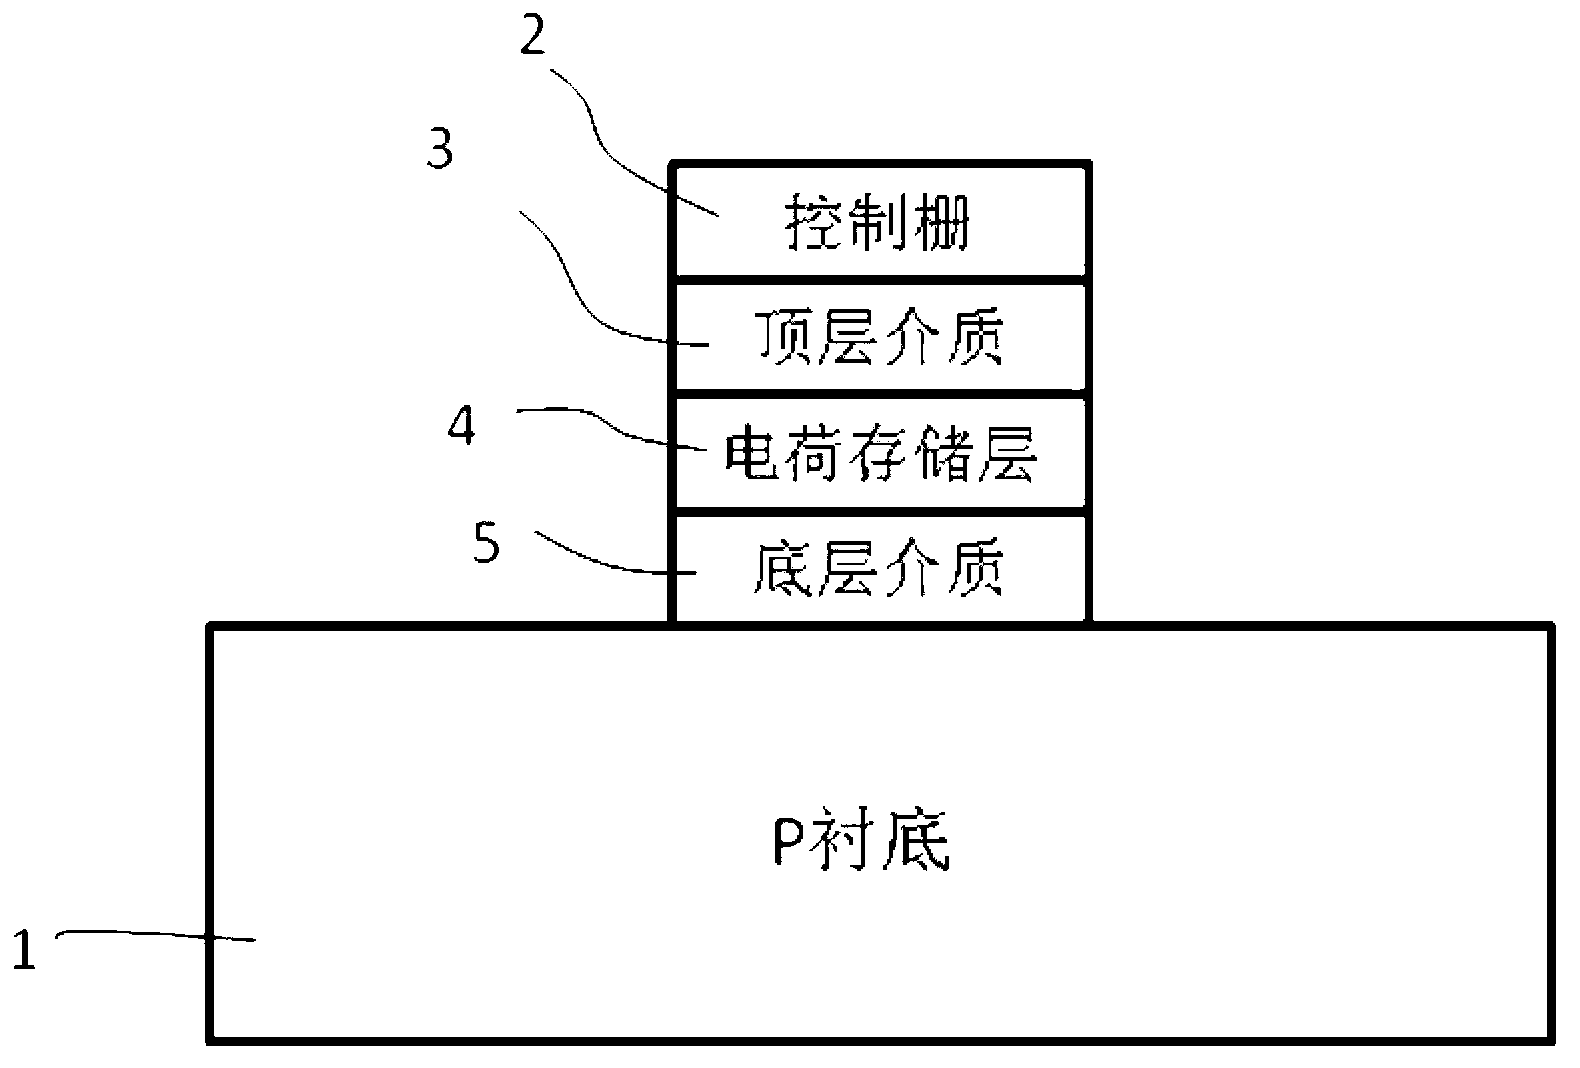 Composite dielectric grating metal-oxide-semiconductor field effect transistor (MOSFET) based dual-transistor light-sensitive detector and signal reading method thereof